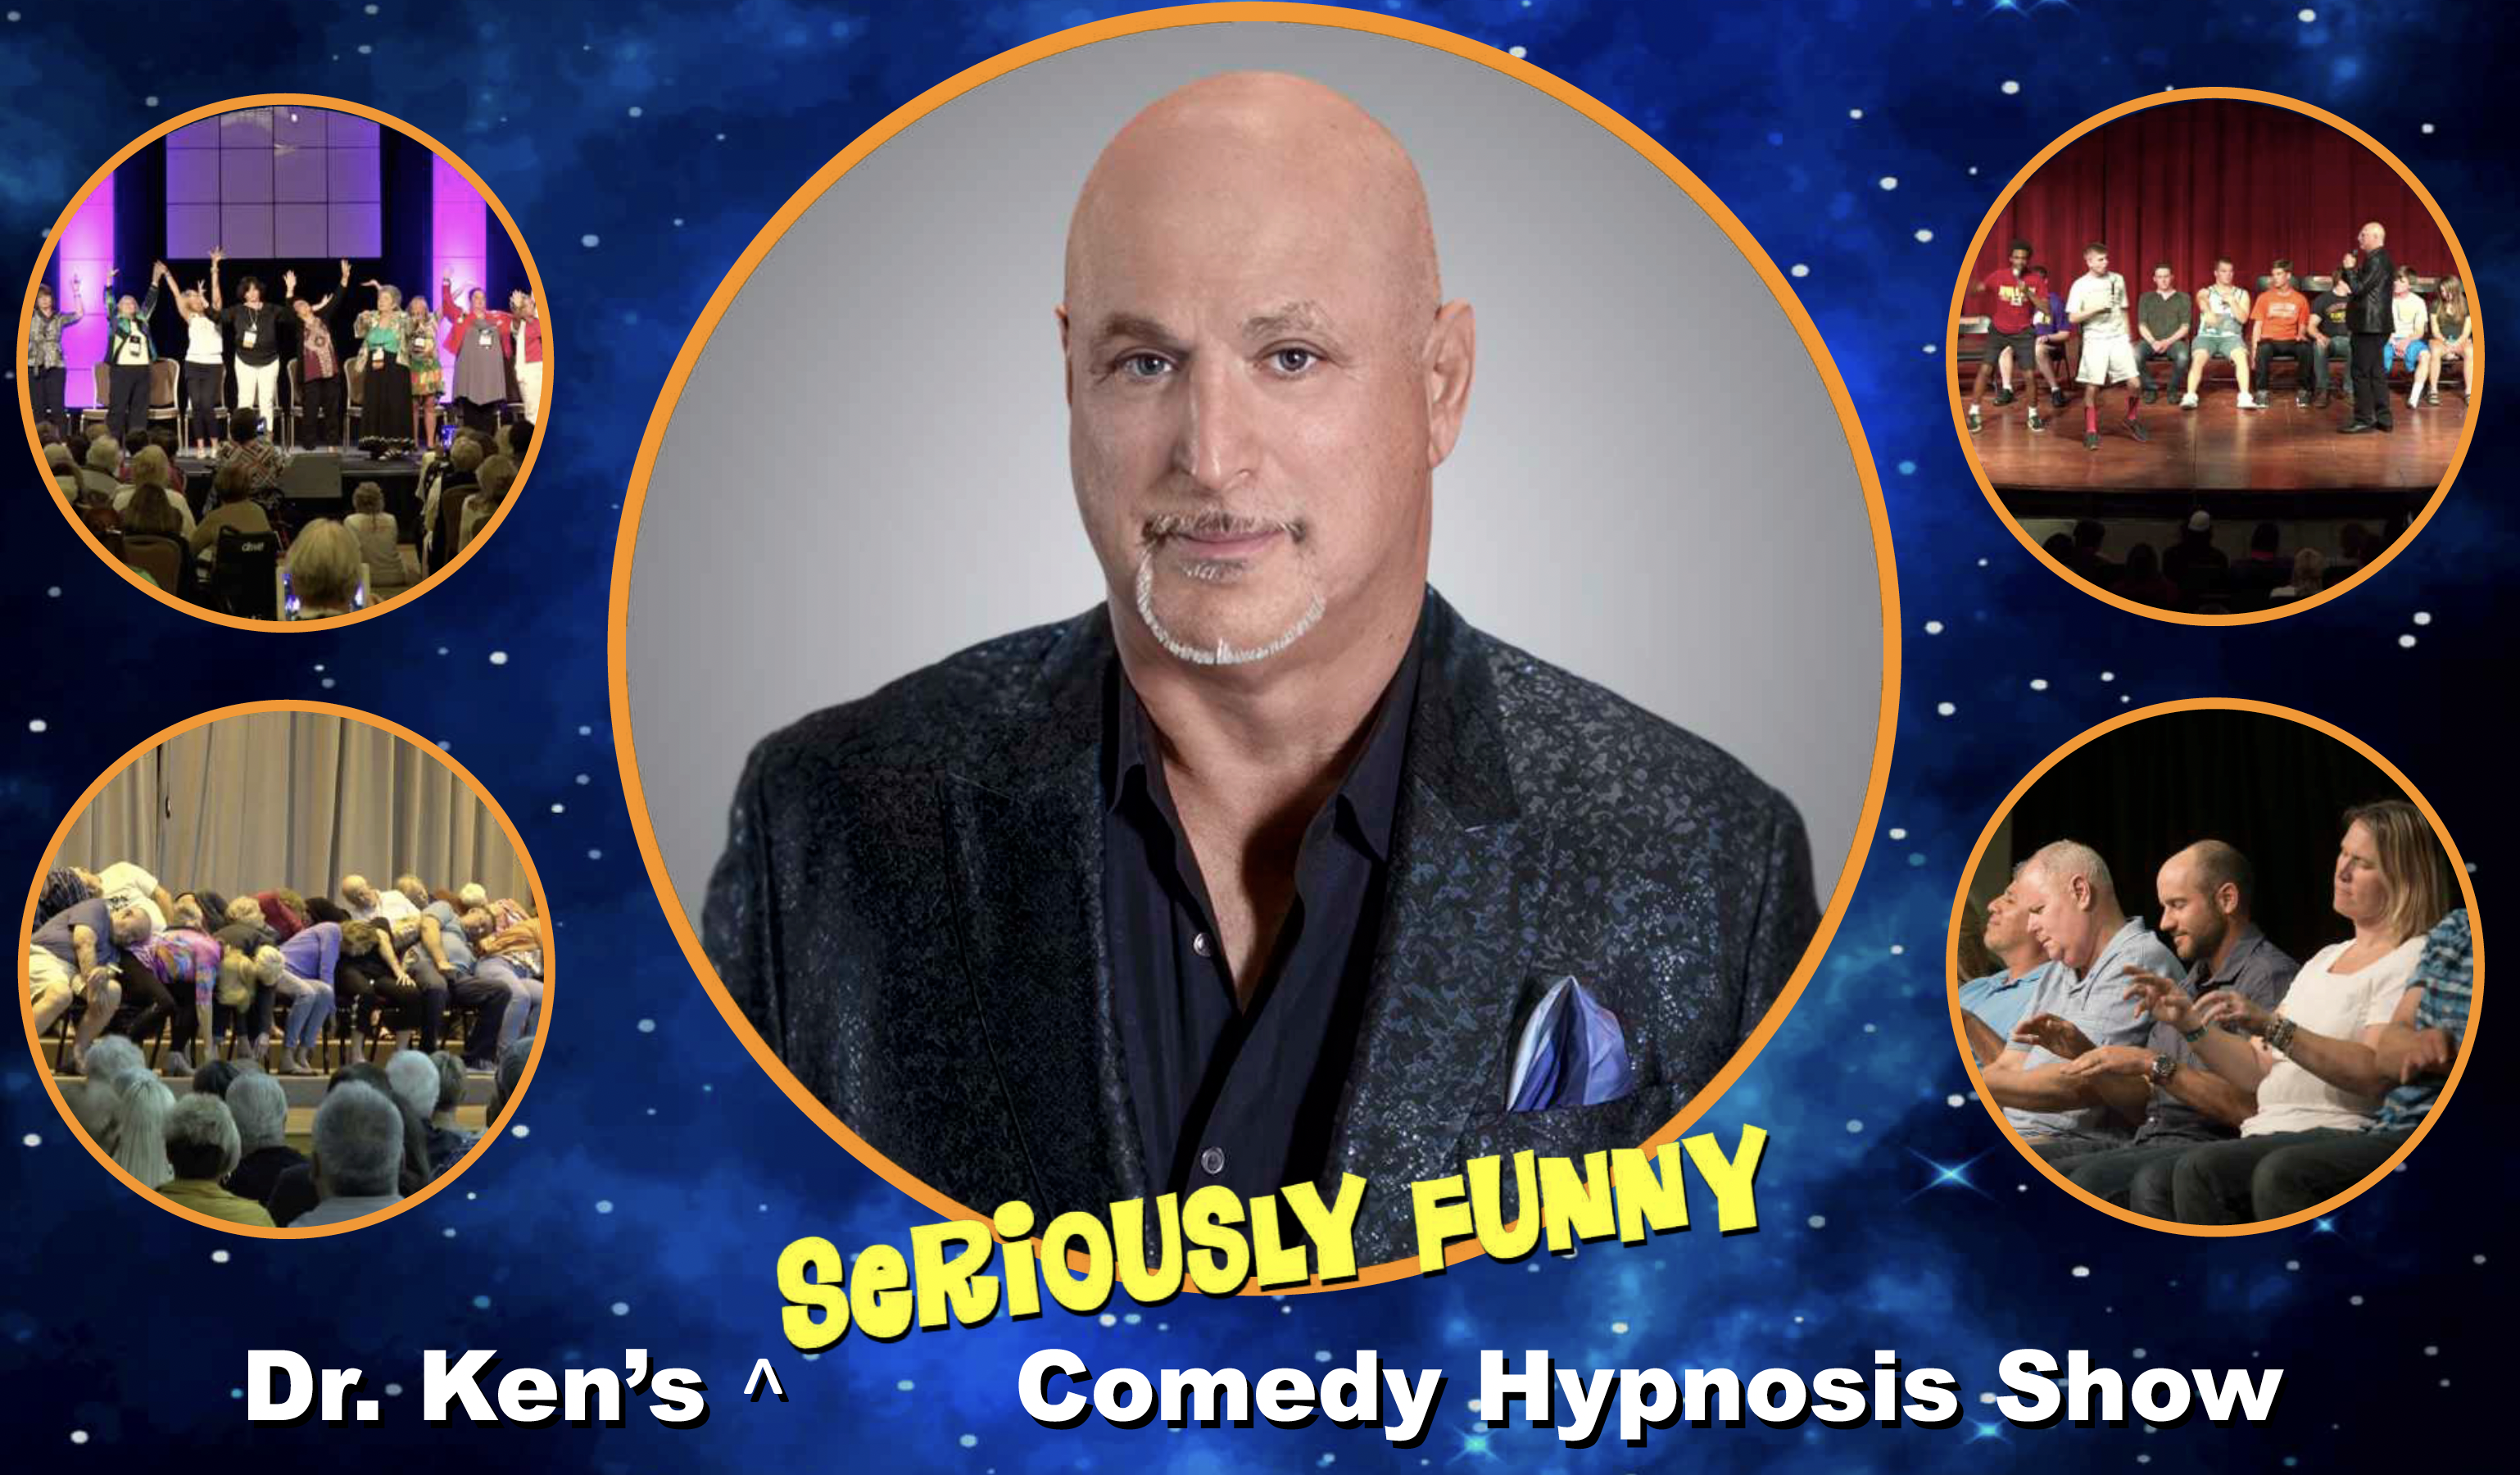 Dr. Ken's Seriously Funny Comedy Hypnosis Show